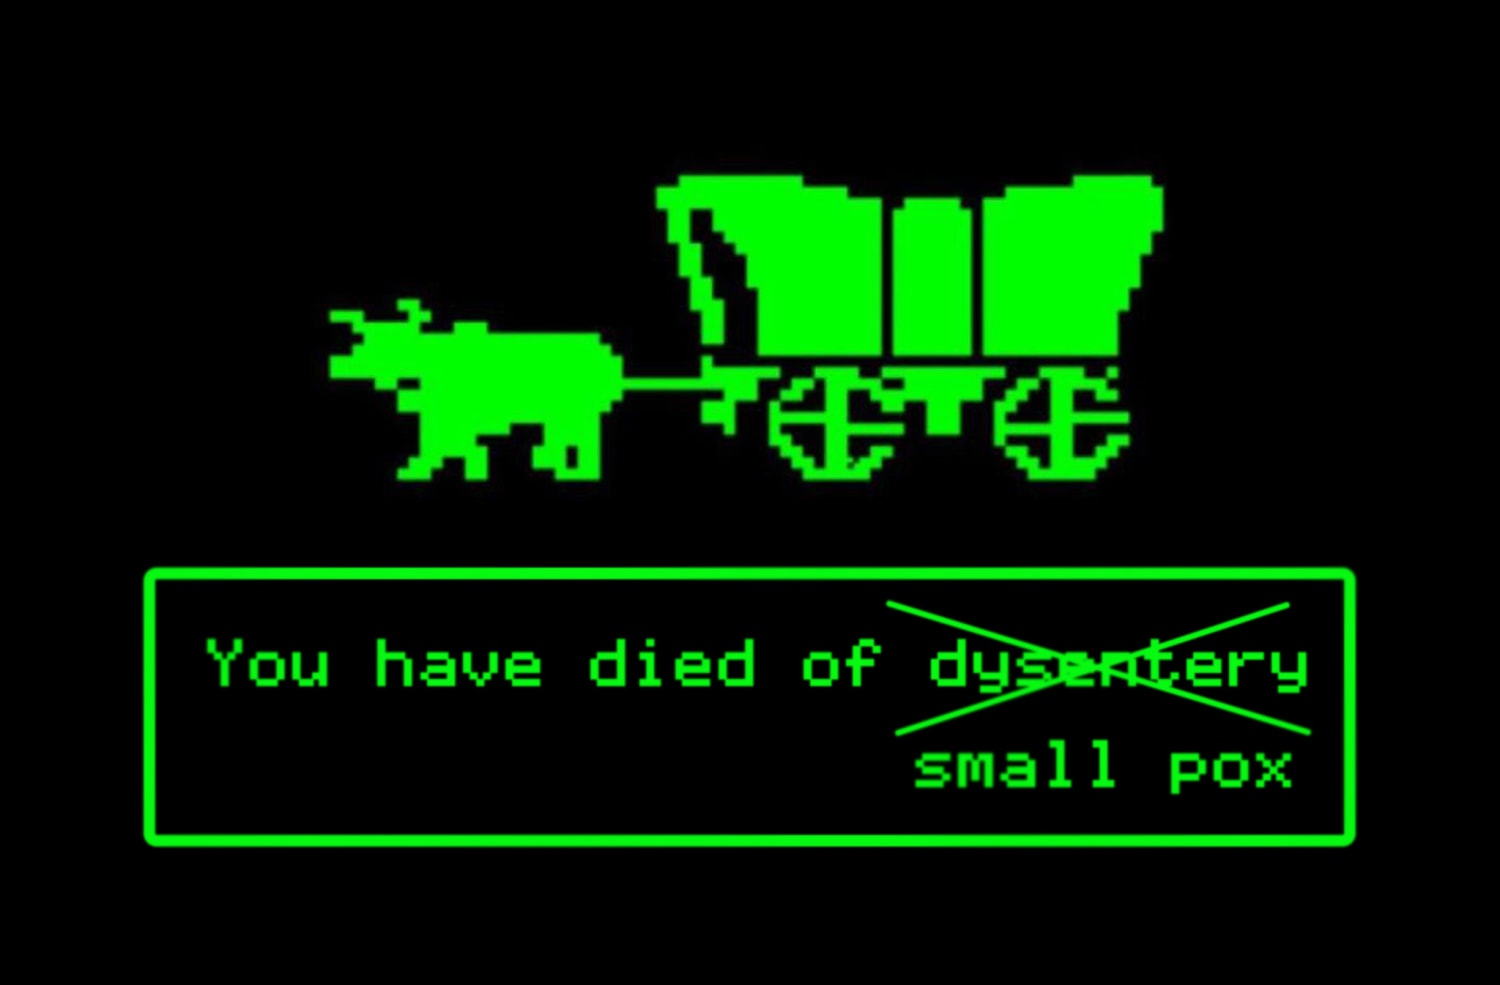 Everything you thought you learned playing 'Oregon Trail' is wrong